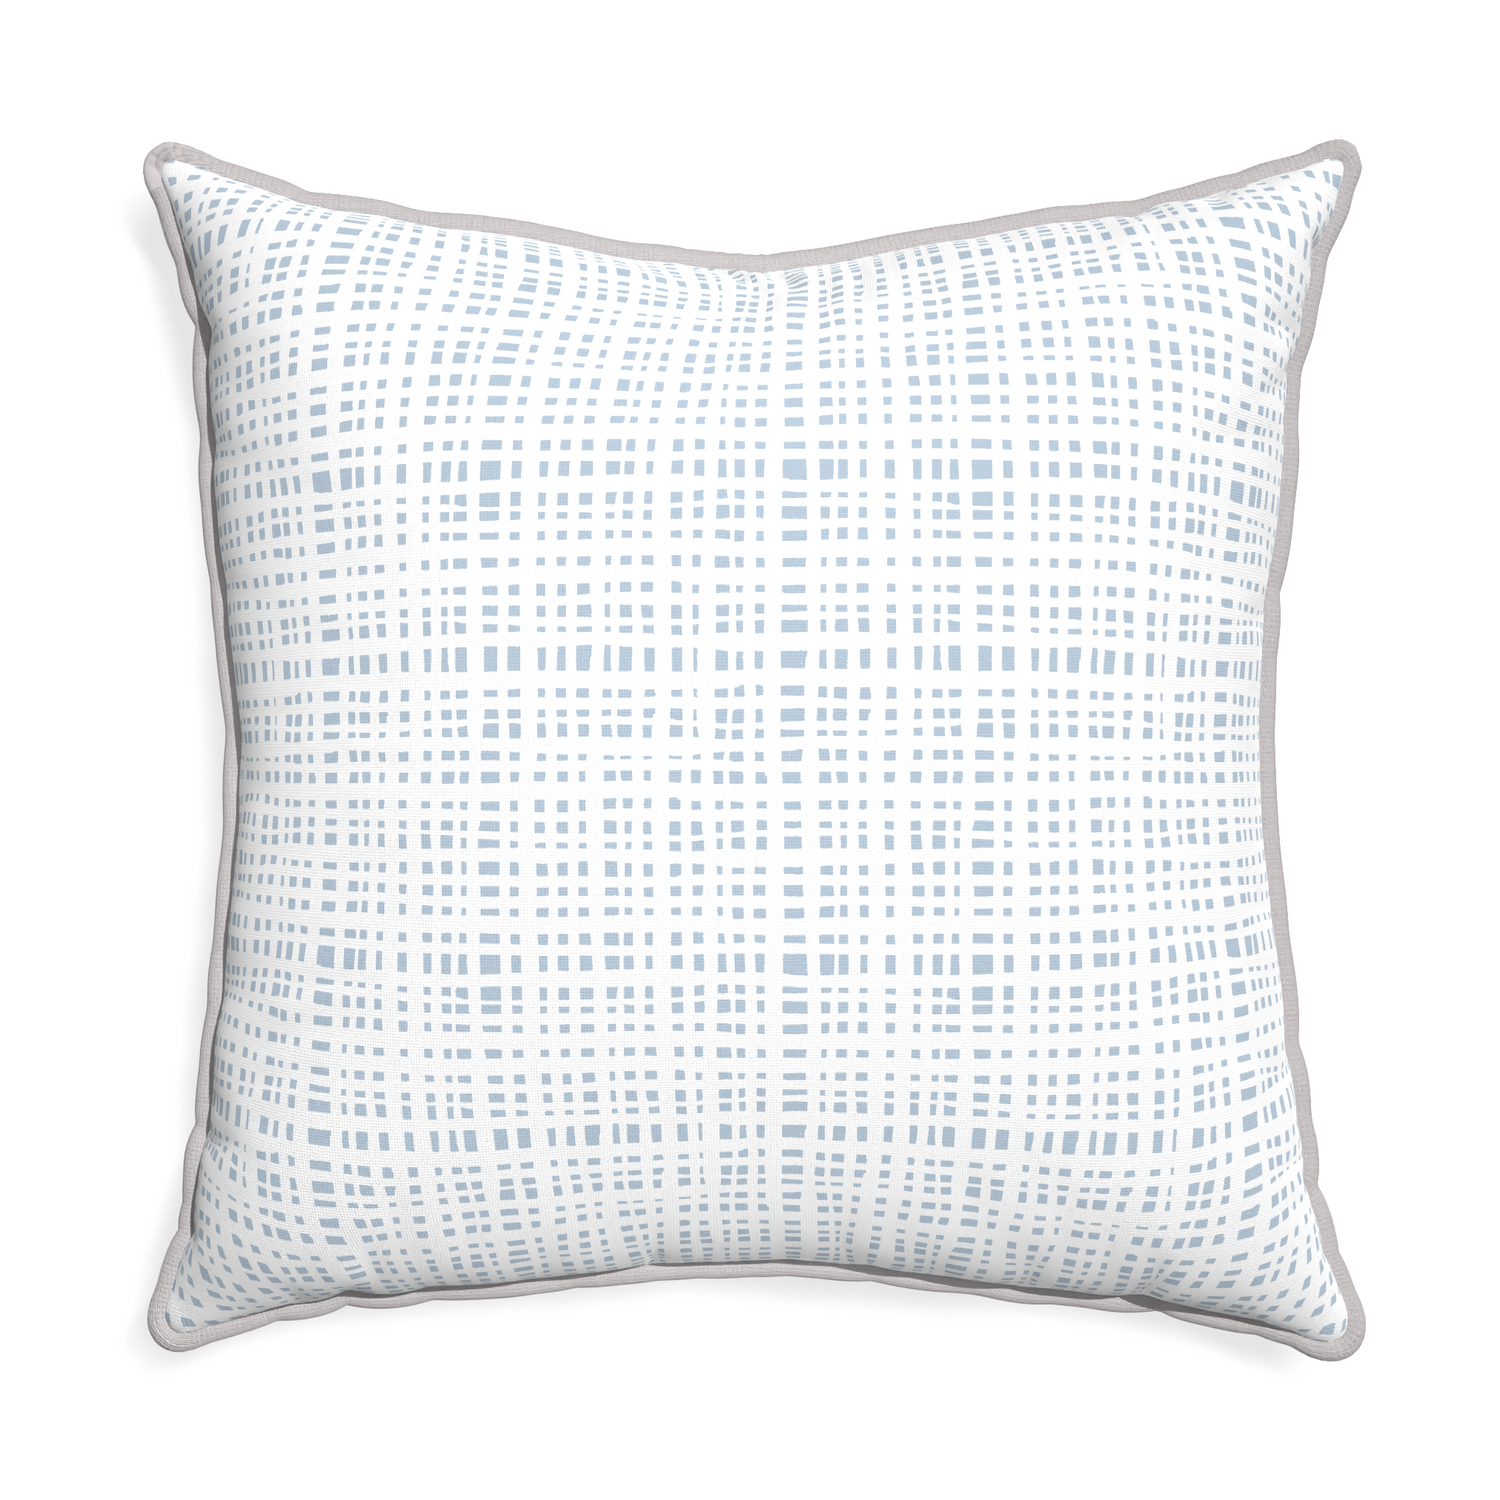 Euro-sham ginger sky custom pillow with pebble piping on white background